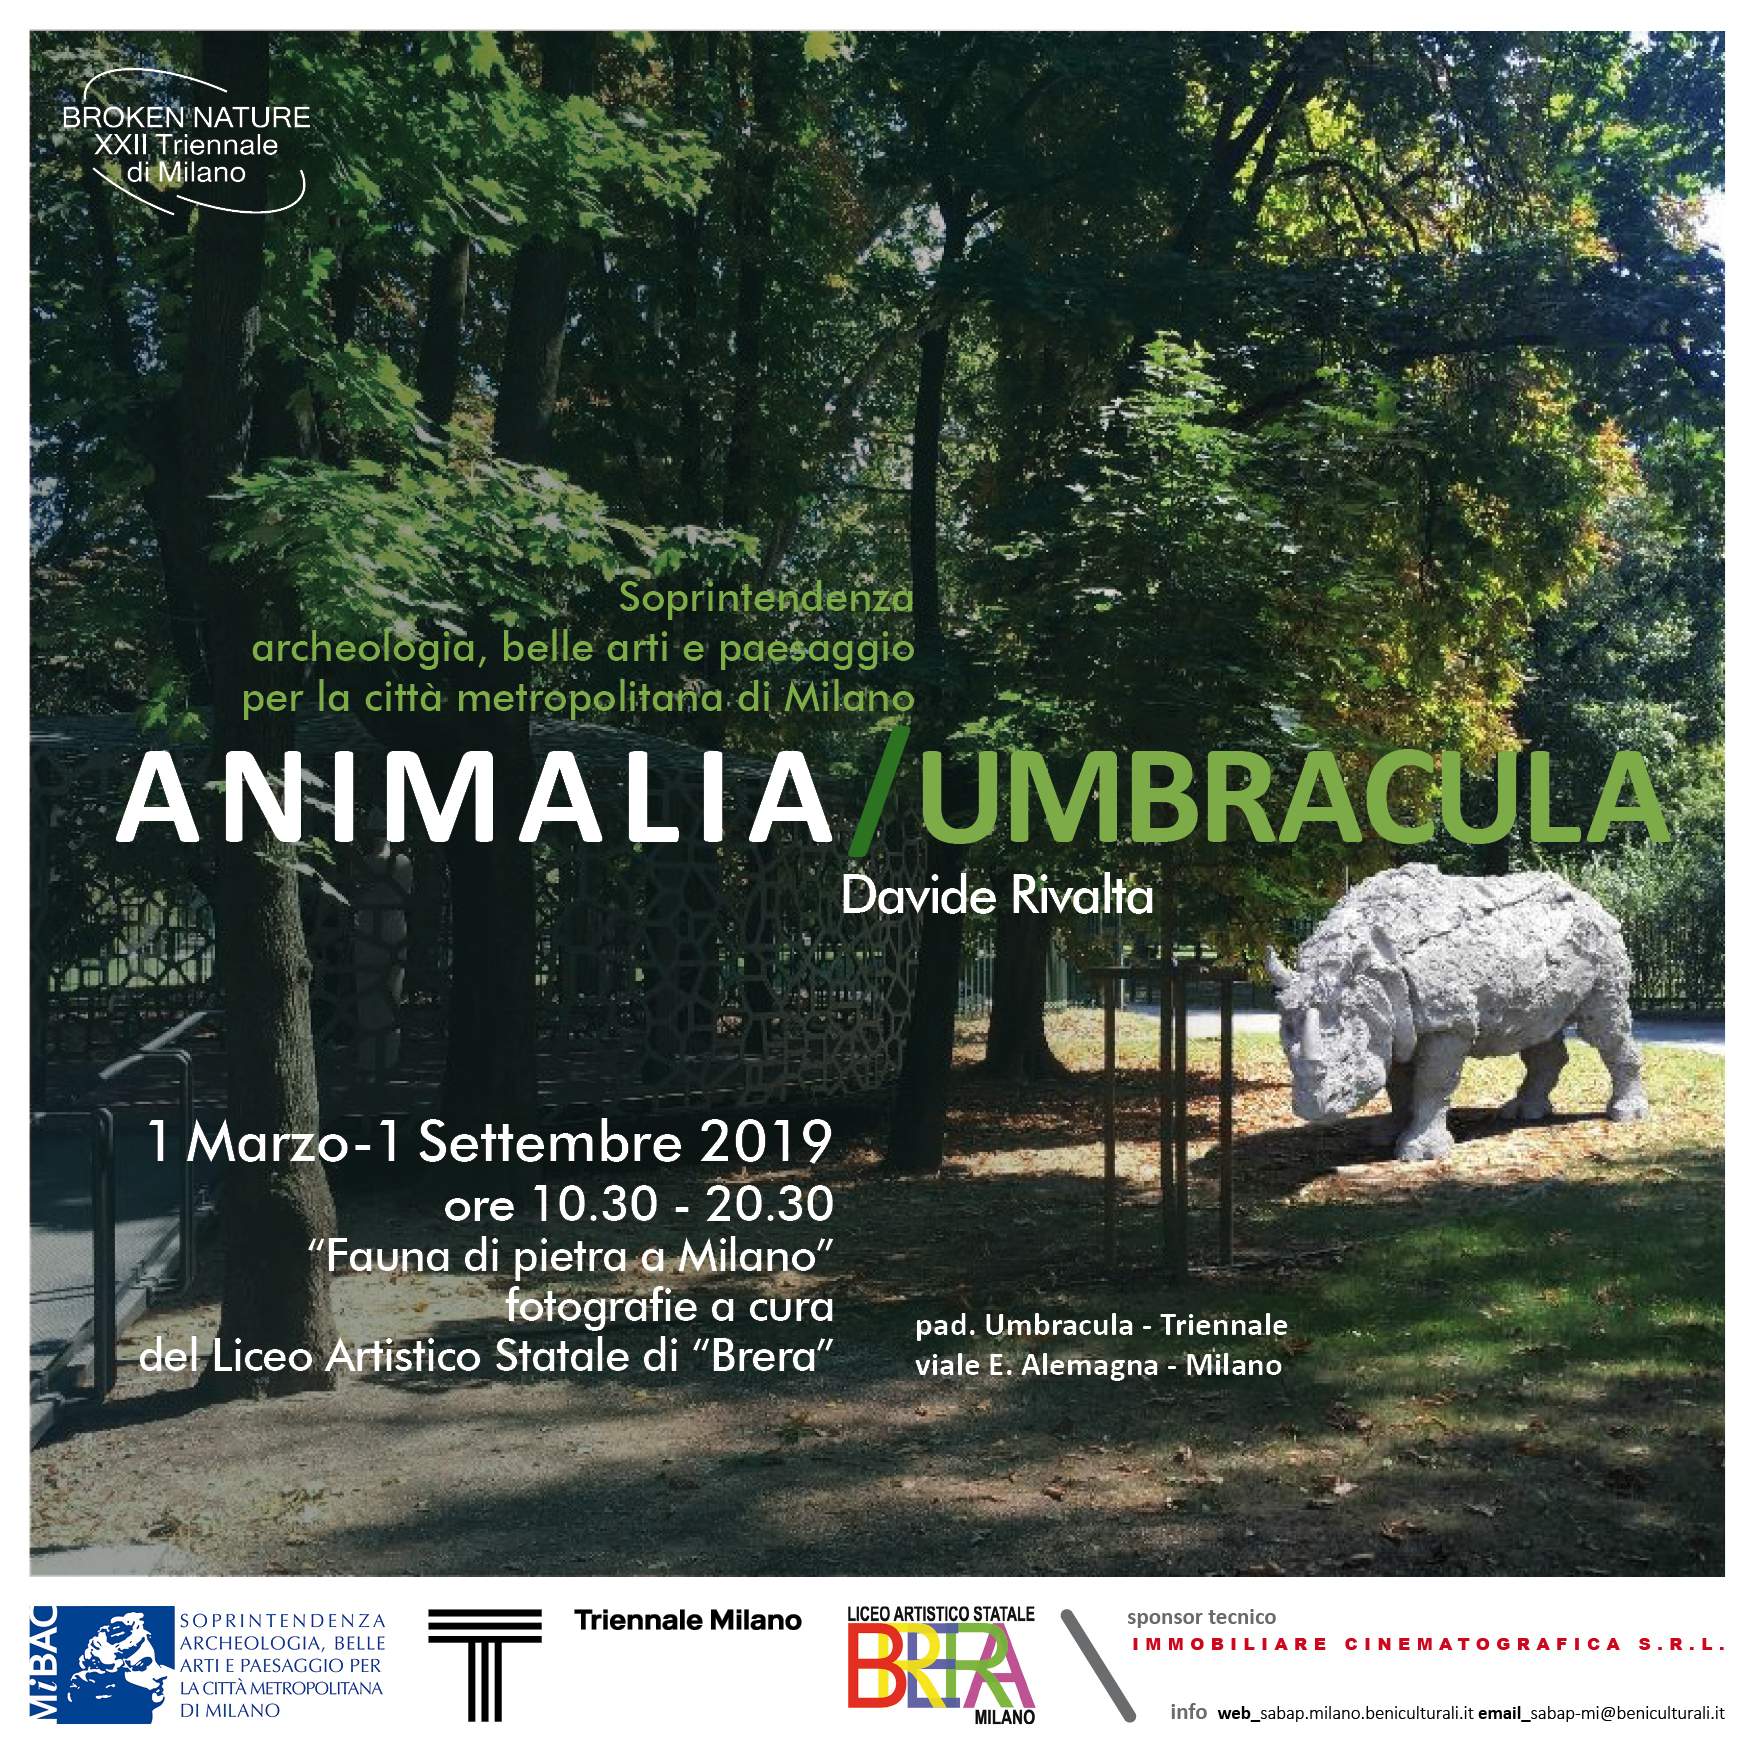 Davide Rivalta's works at the XXII Triennale with the exhibition Animalia/Umbracula